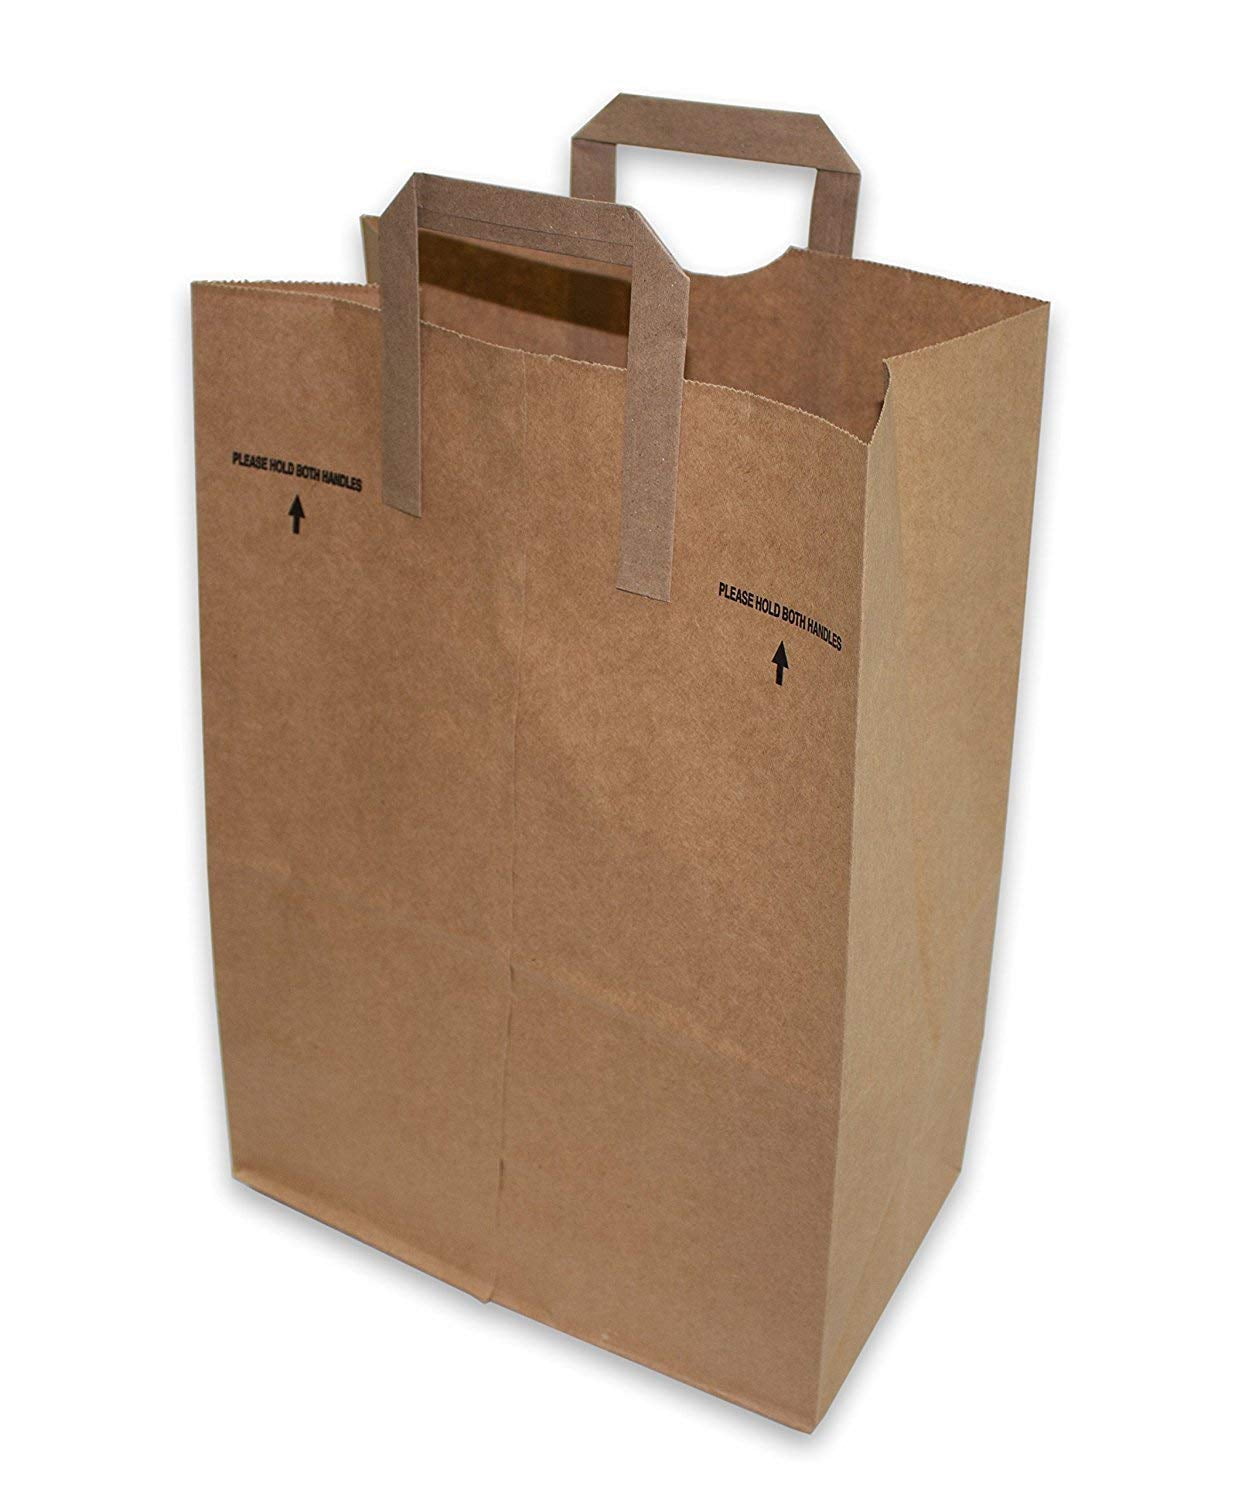 Paper Retail Grocery Bags Kraft with Handles 12x7x17 by Duro (Pack of 100) - 0